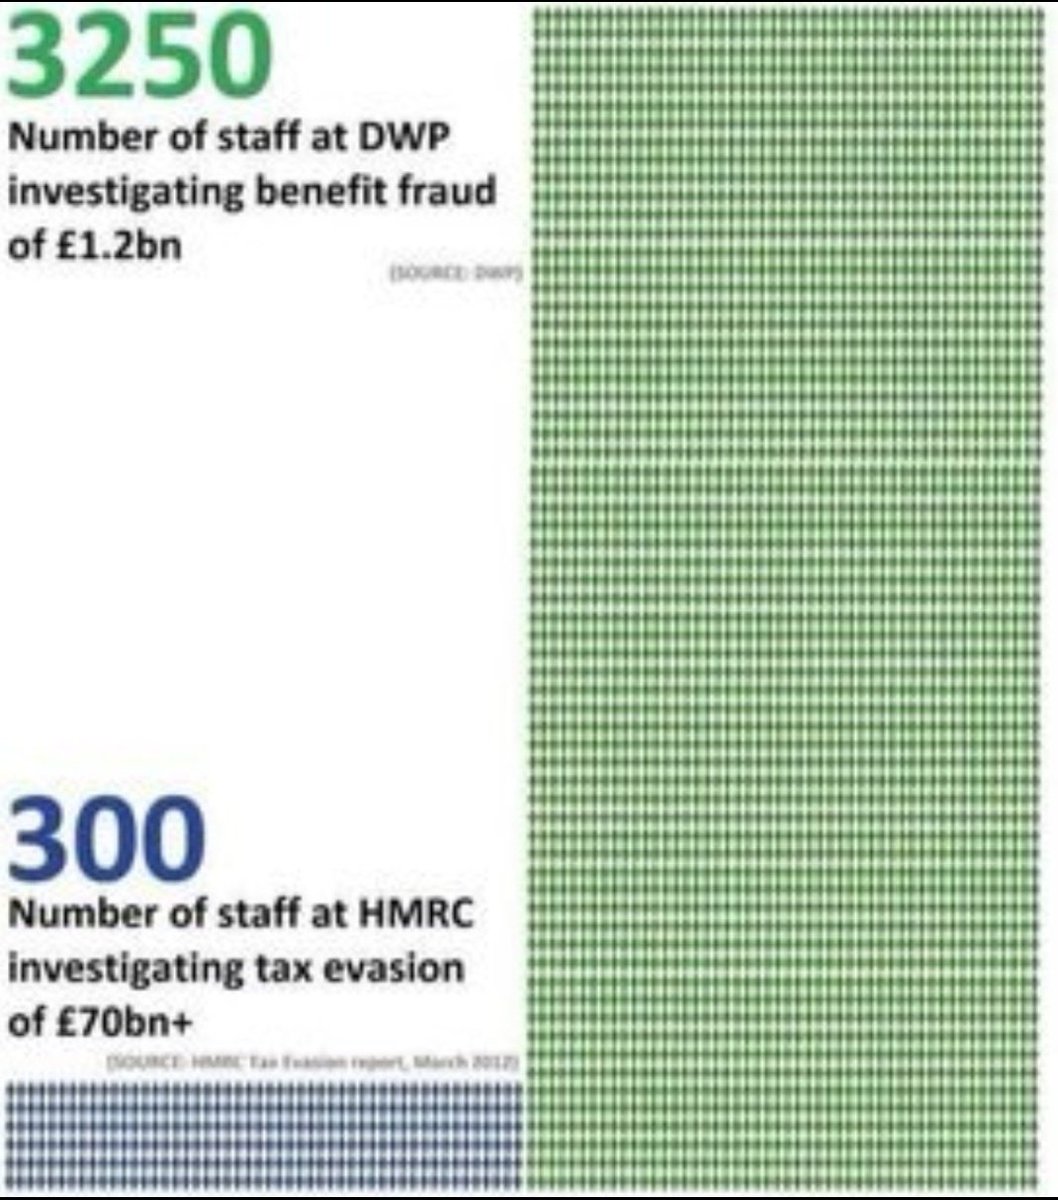 This explains the priorities of this tory government.
#newsnight